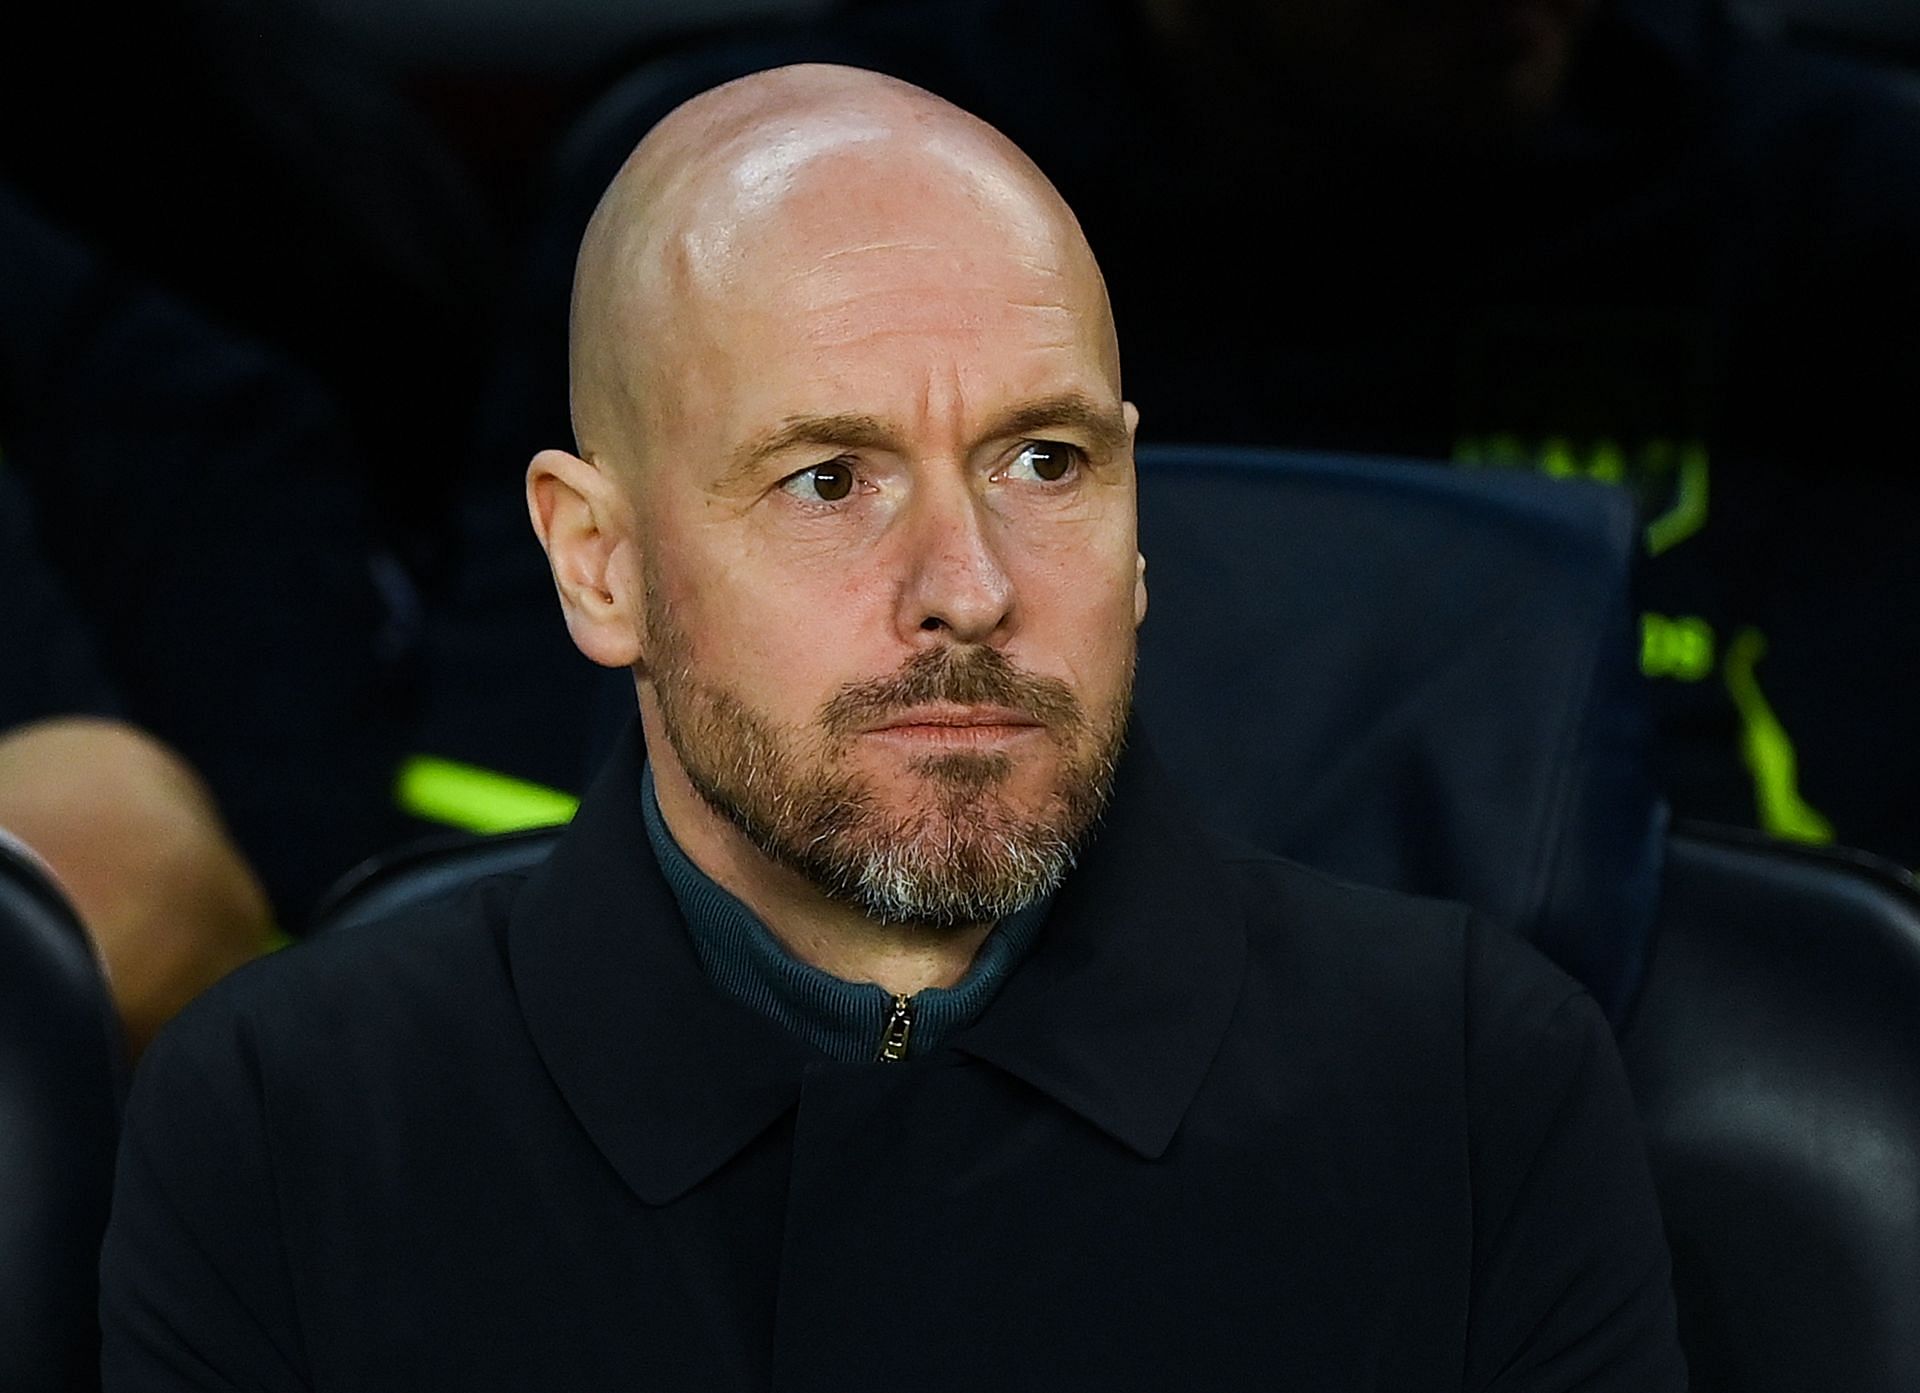 Erik ten Hag confirms talks are being held with the FA.